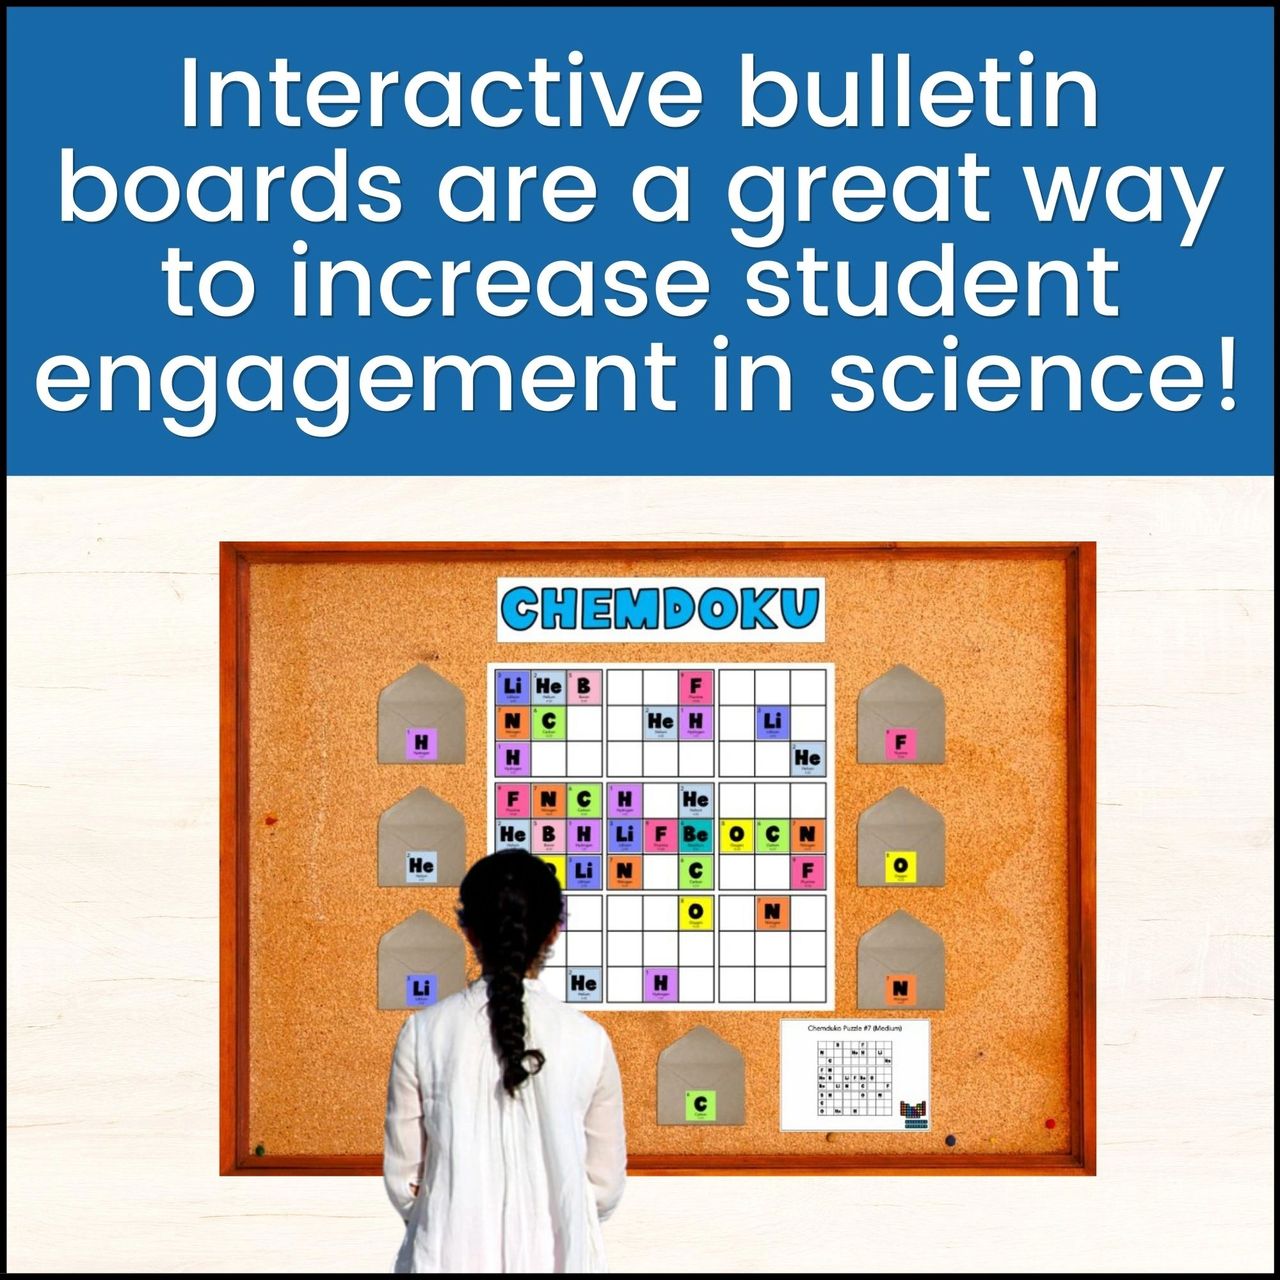 Photo of a student standing at an interactive bulletin board with a chemistry sudoku game. The title says, "Interactive bulletin boards are a great way to increase student engagement in science."